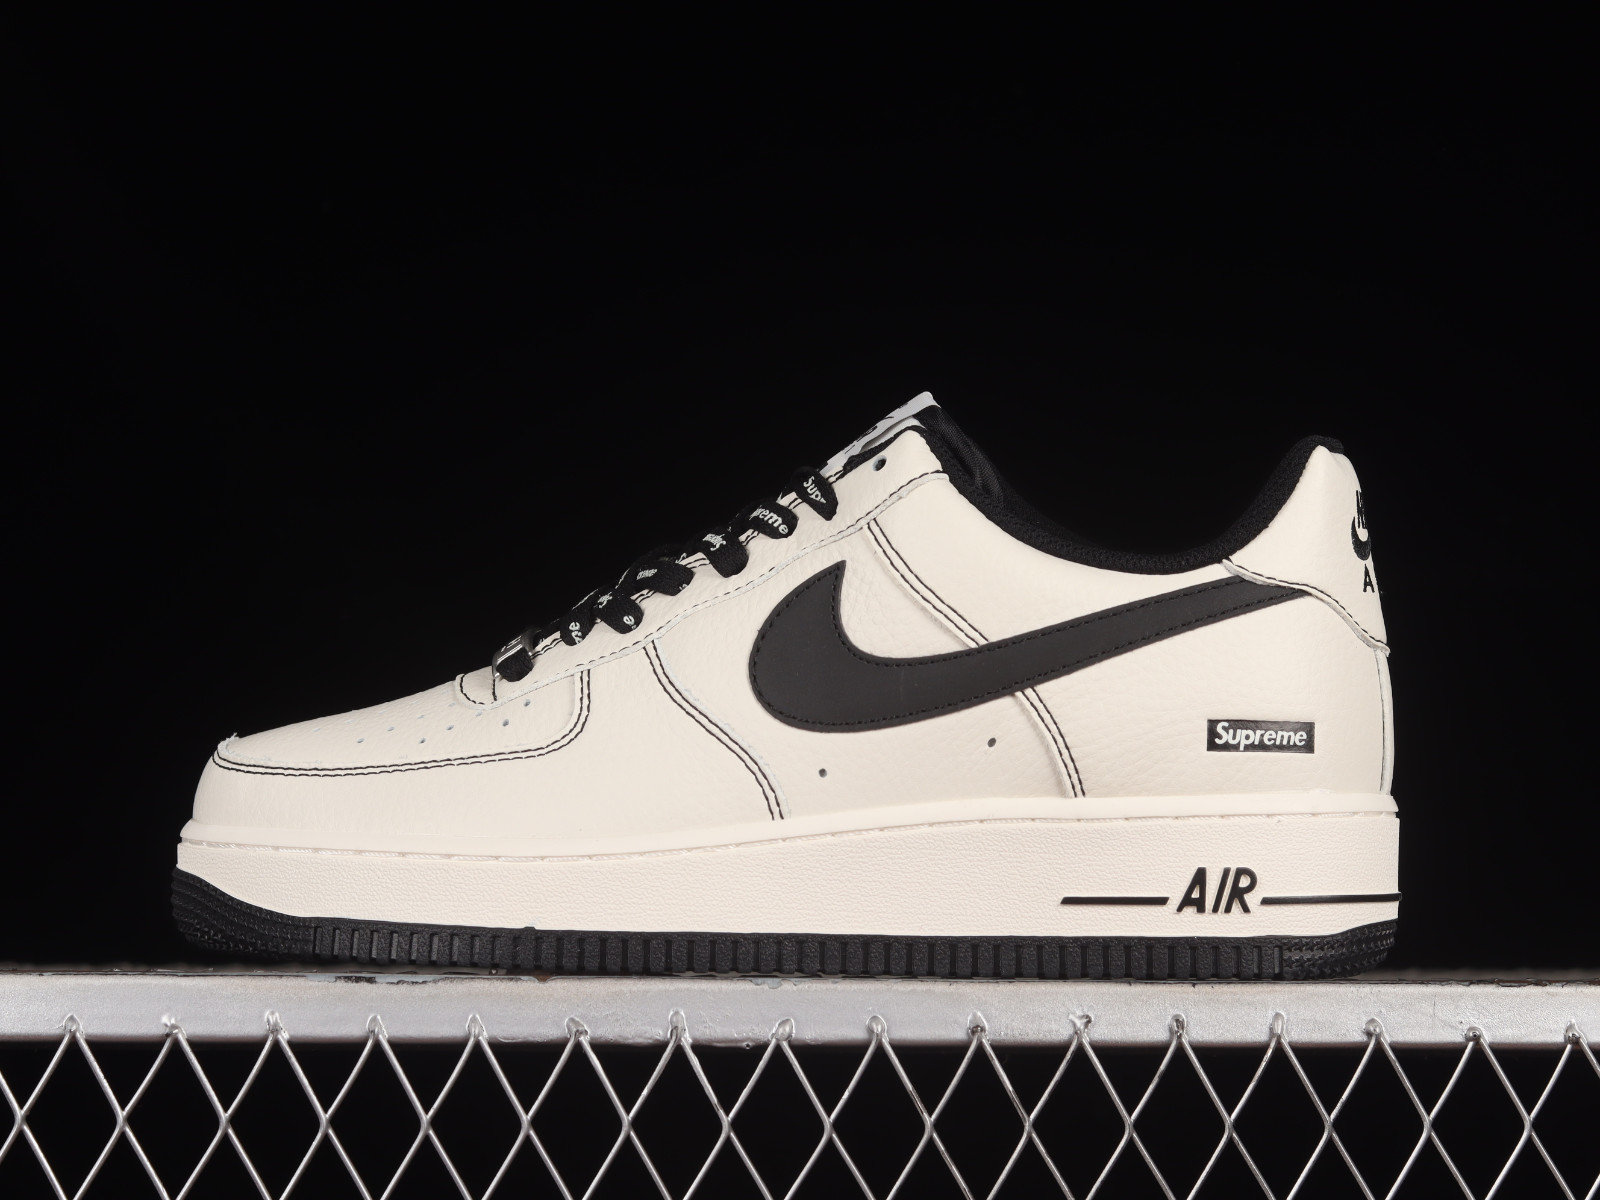 Nike Air Force 1 Low x OFF-WHITE Black 2018 for Sale, Authenticity  Guaranteed